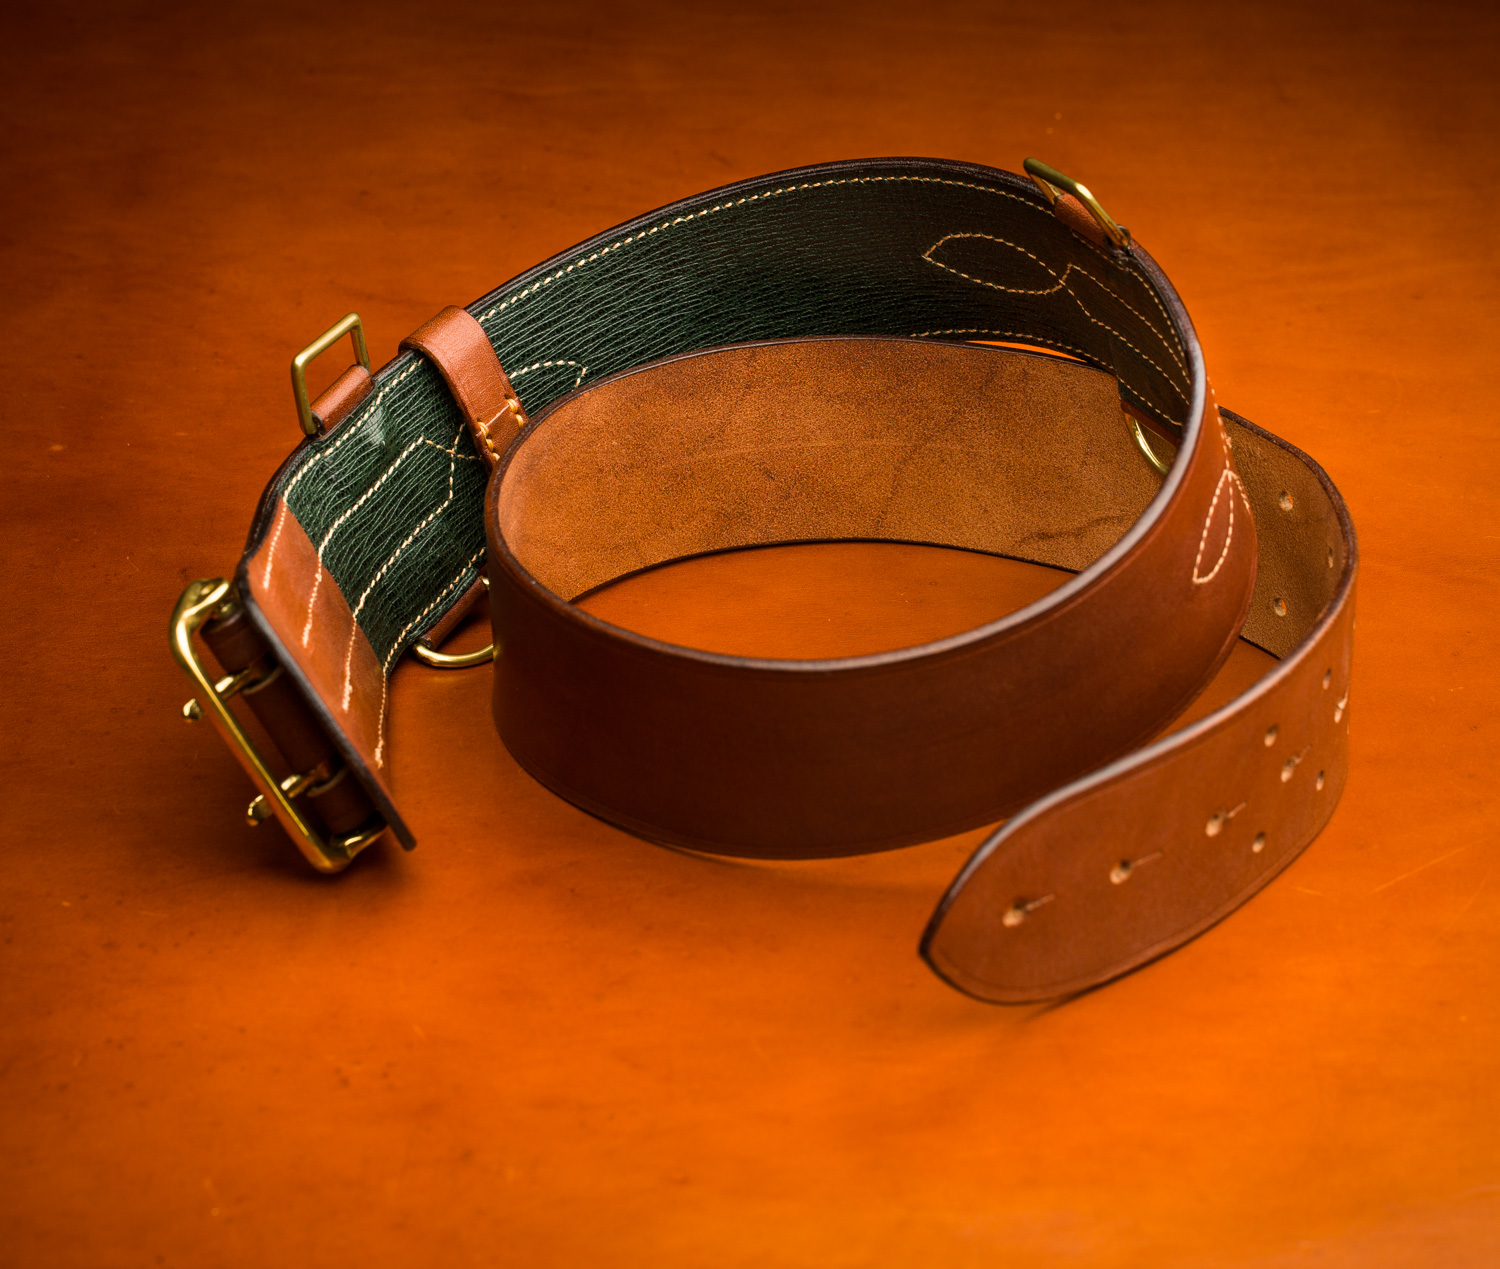 Showing the inside of the Sam Brown Belt